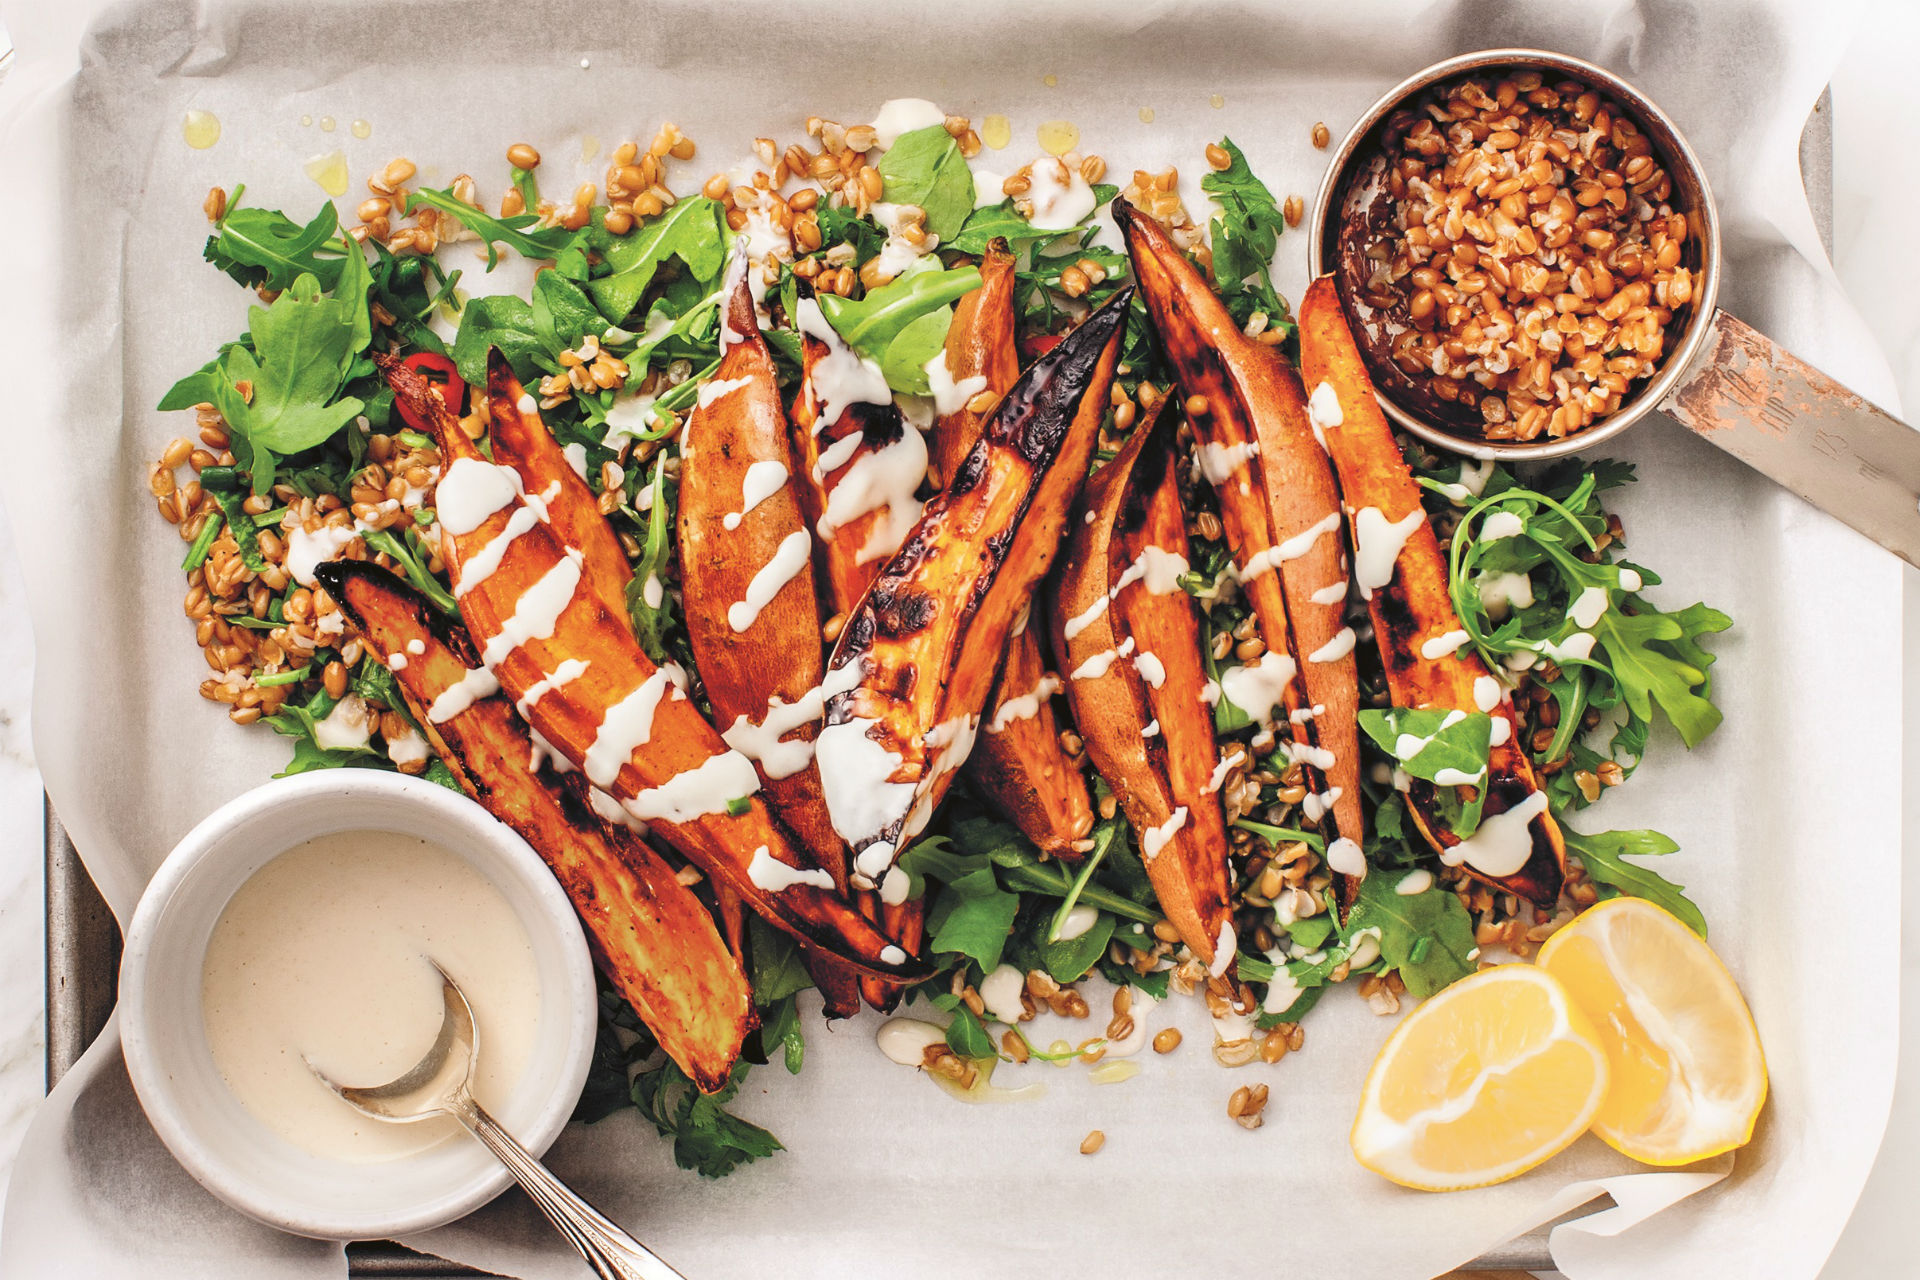 sweet potato fries on herbed grains with arugula